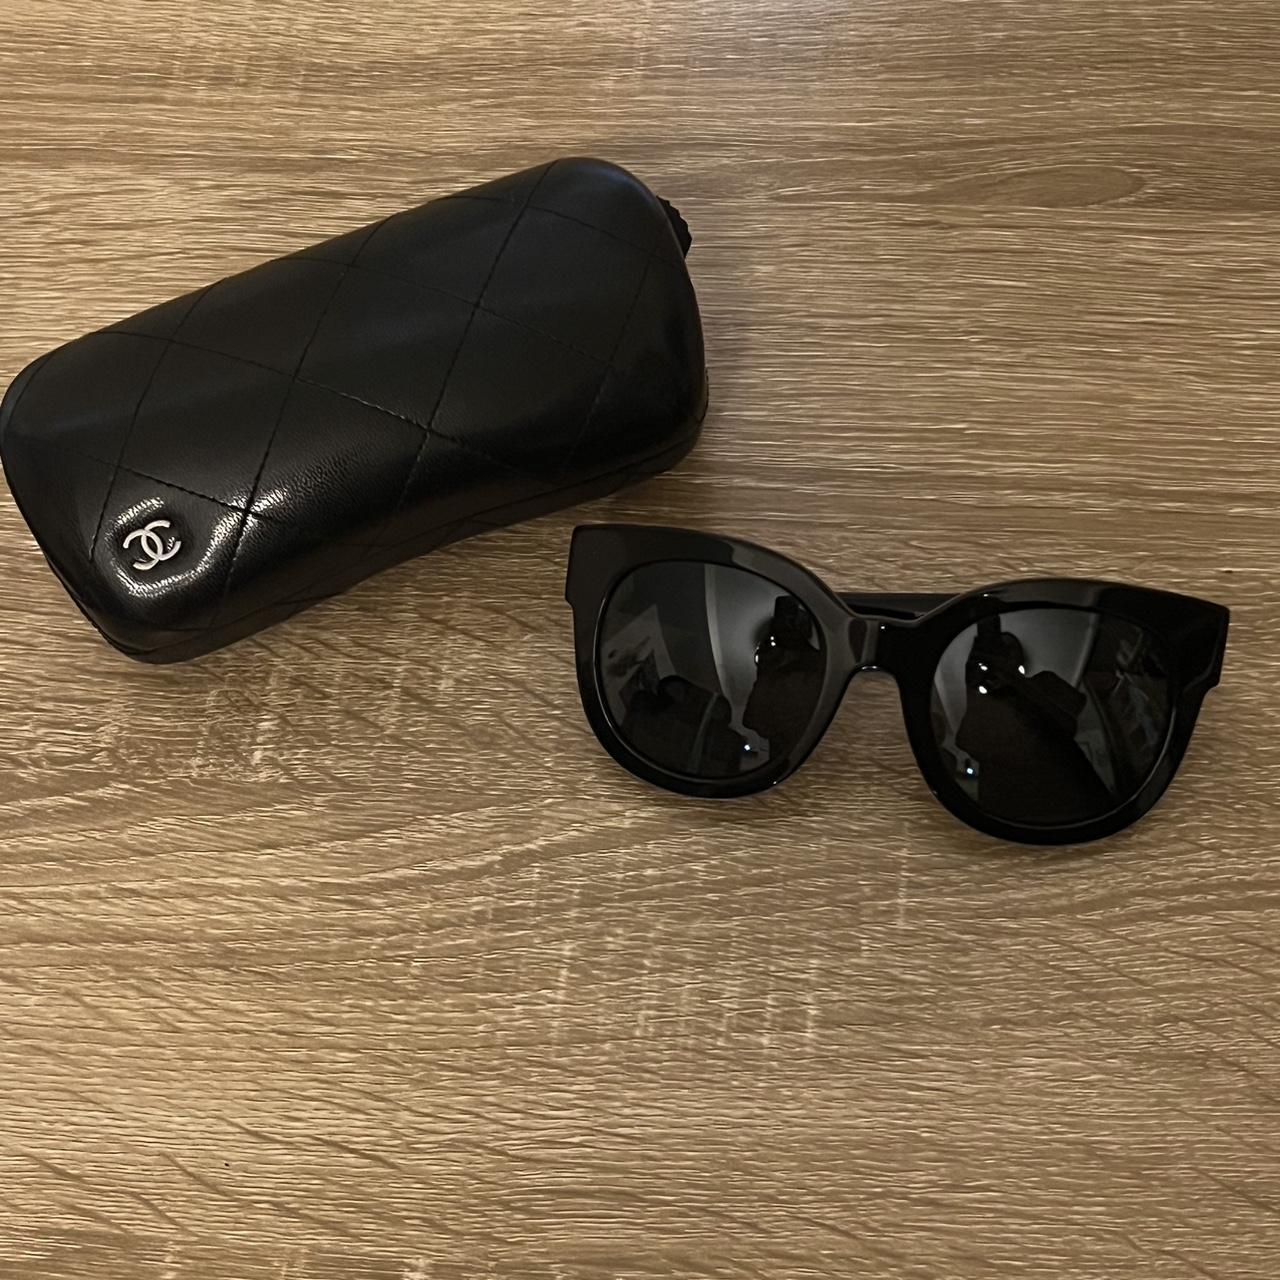 Authentic Chanel sunglasses (in original packaging)